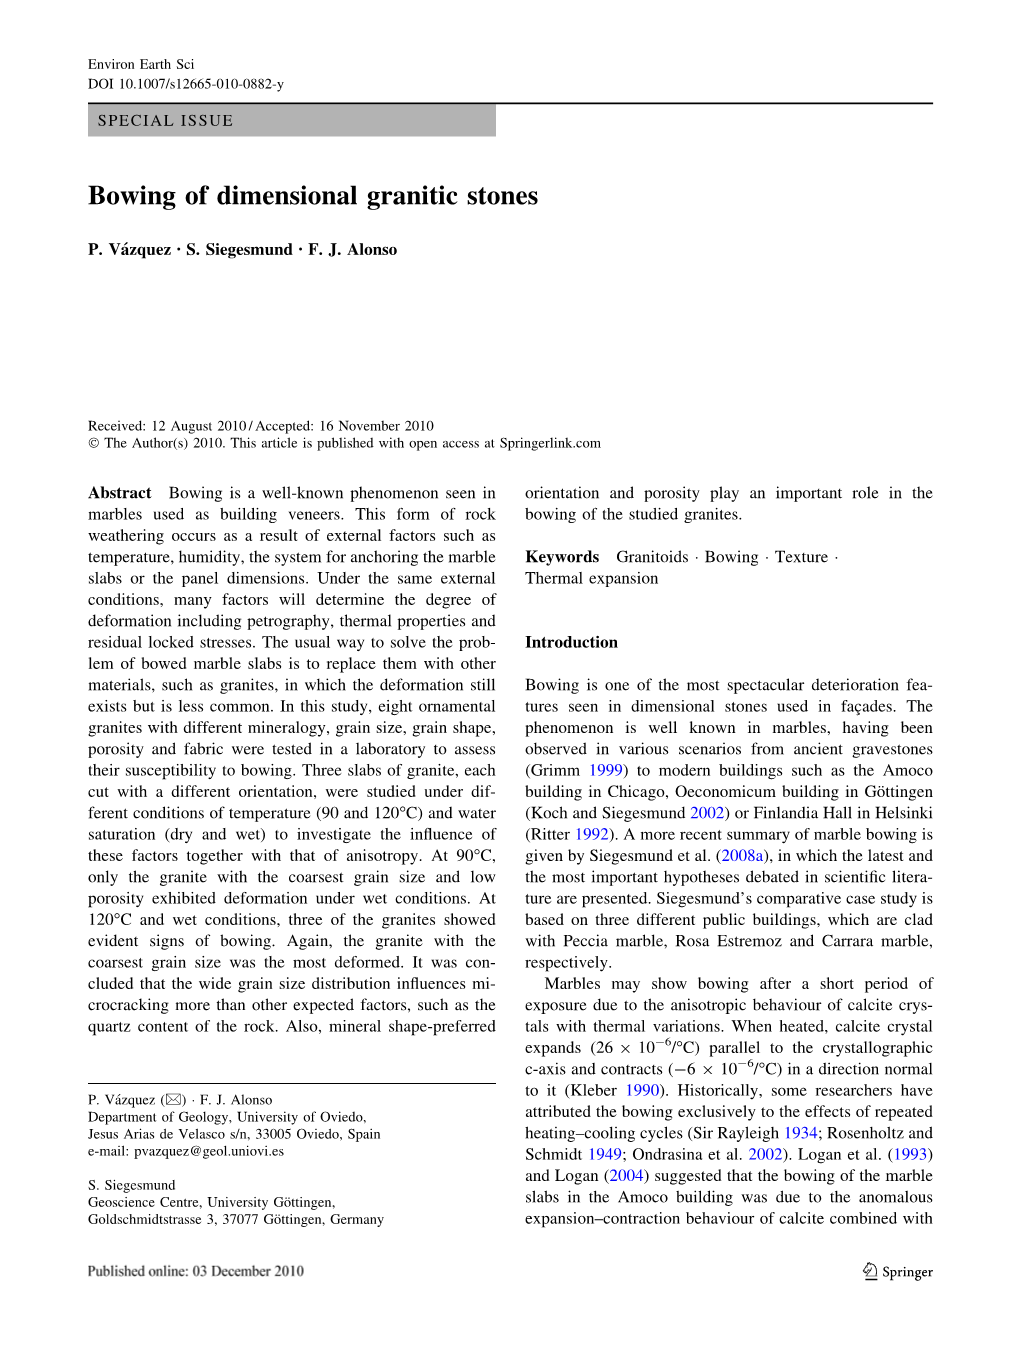 Bowing of Dimensional Granitic Stones